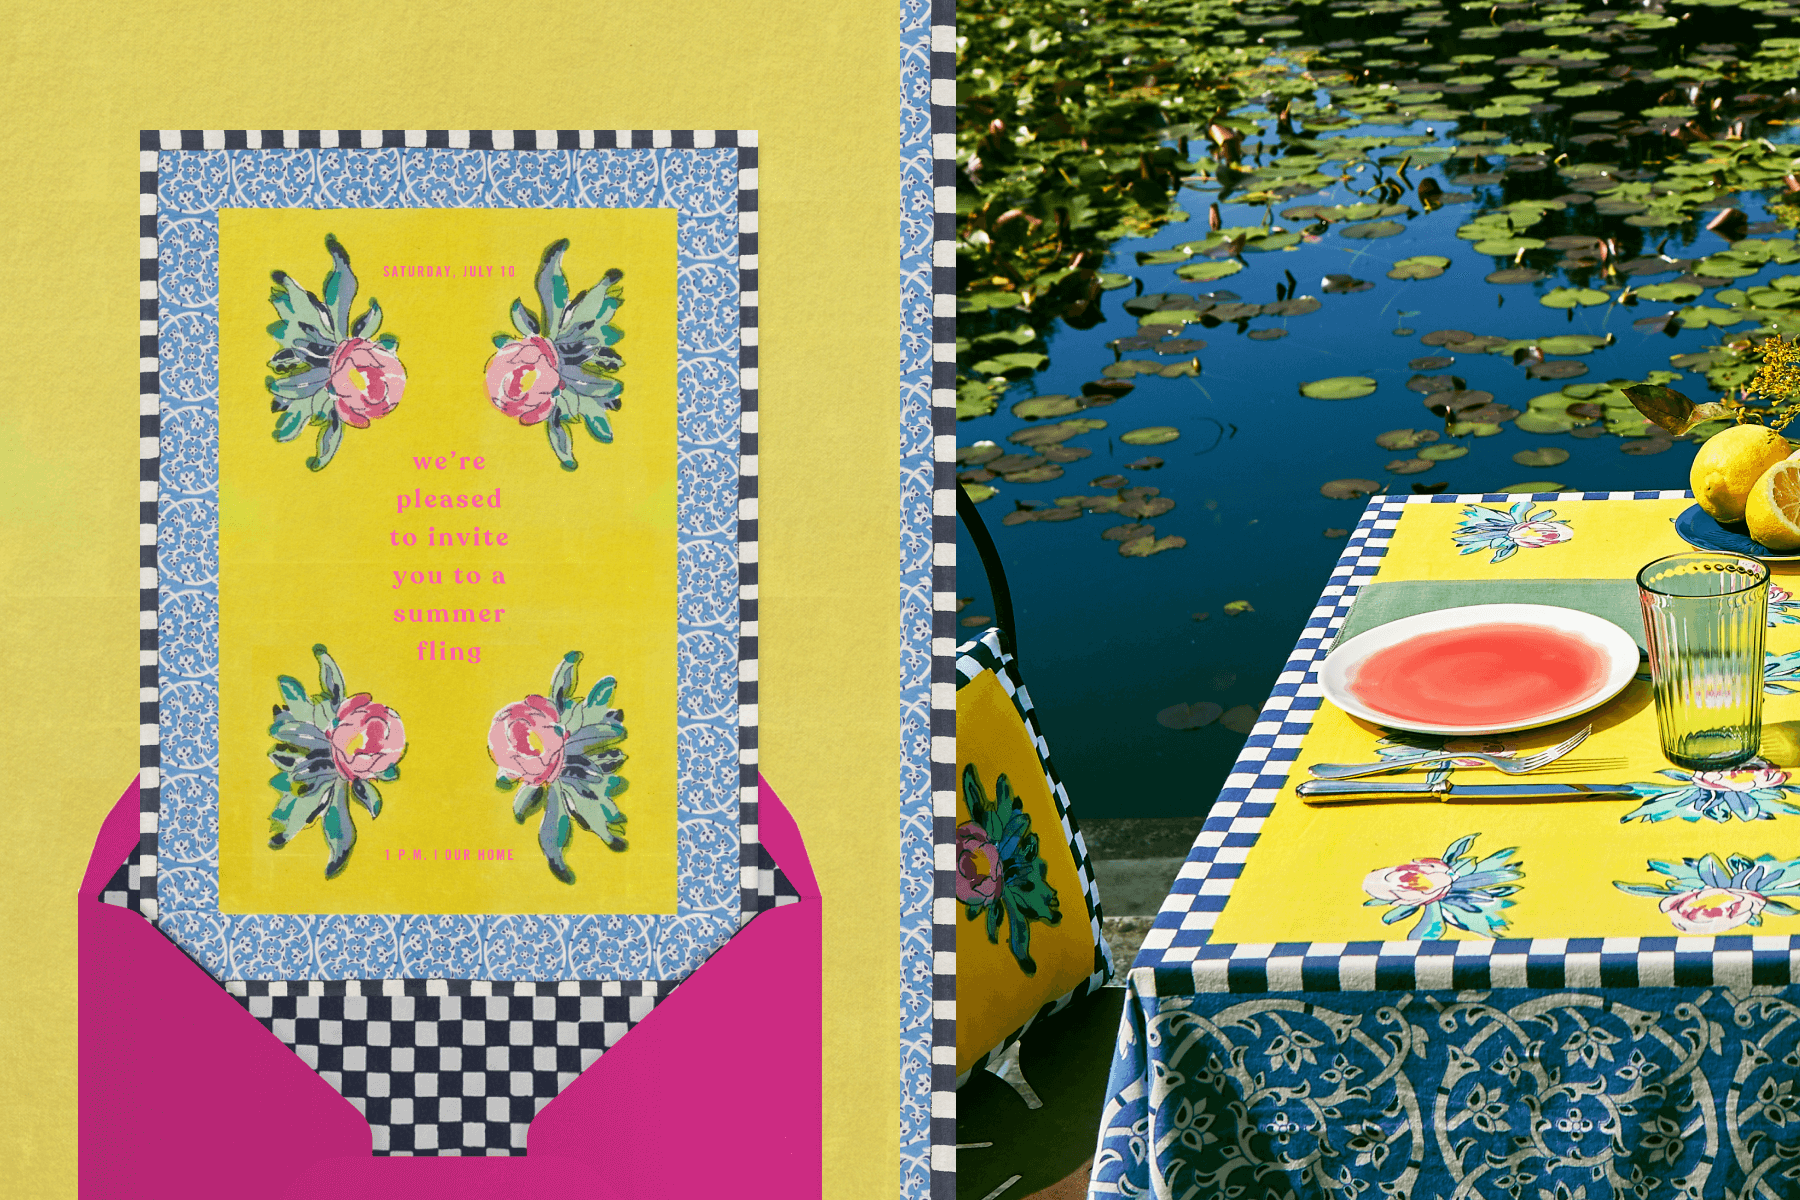 Left: Bright yellow invitation featuring pink flowers and a blue and white border. Right: Outdoor table set with a bright yellow tablecloth, next to a pond filled with lily pads. 